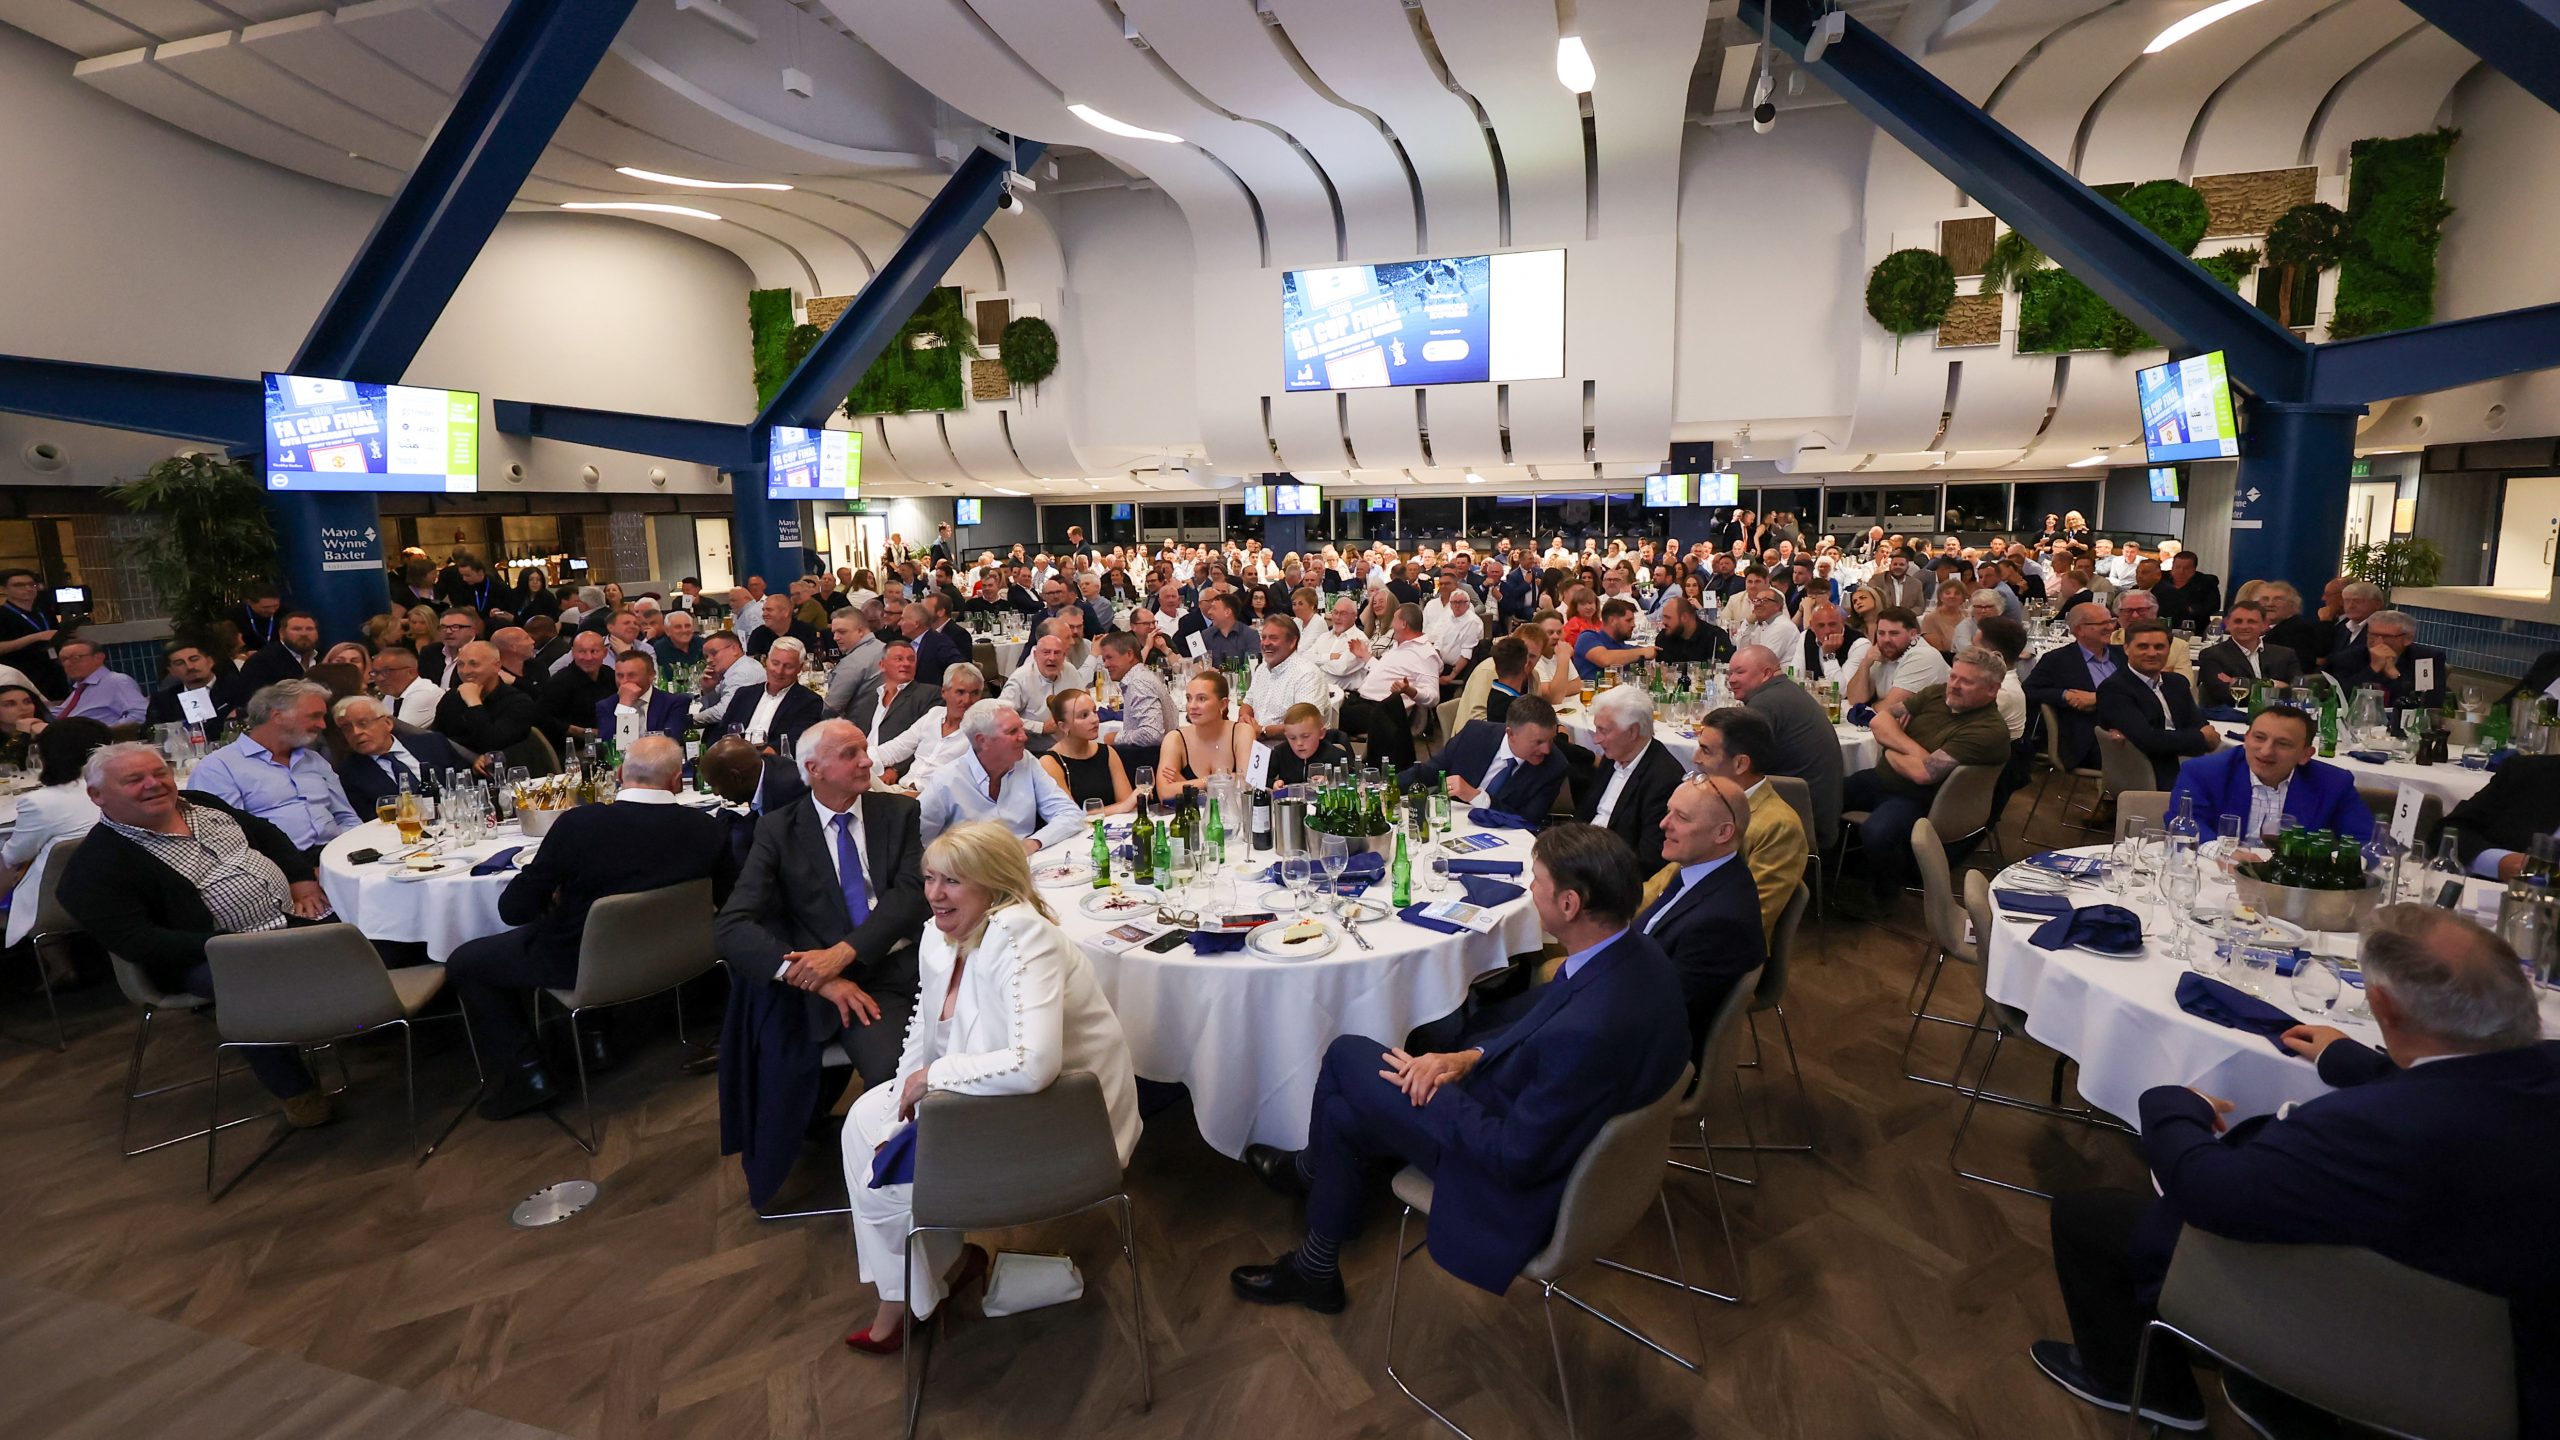 Hundreds celebrate 40th anniversary of 1983 cup final at special event